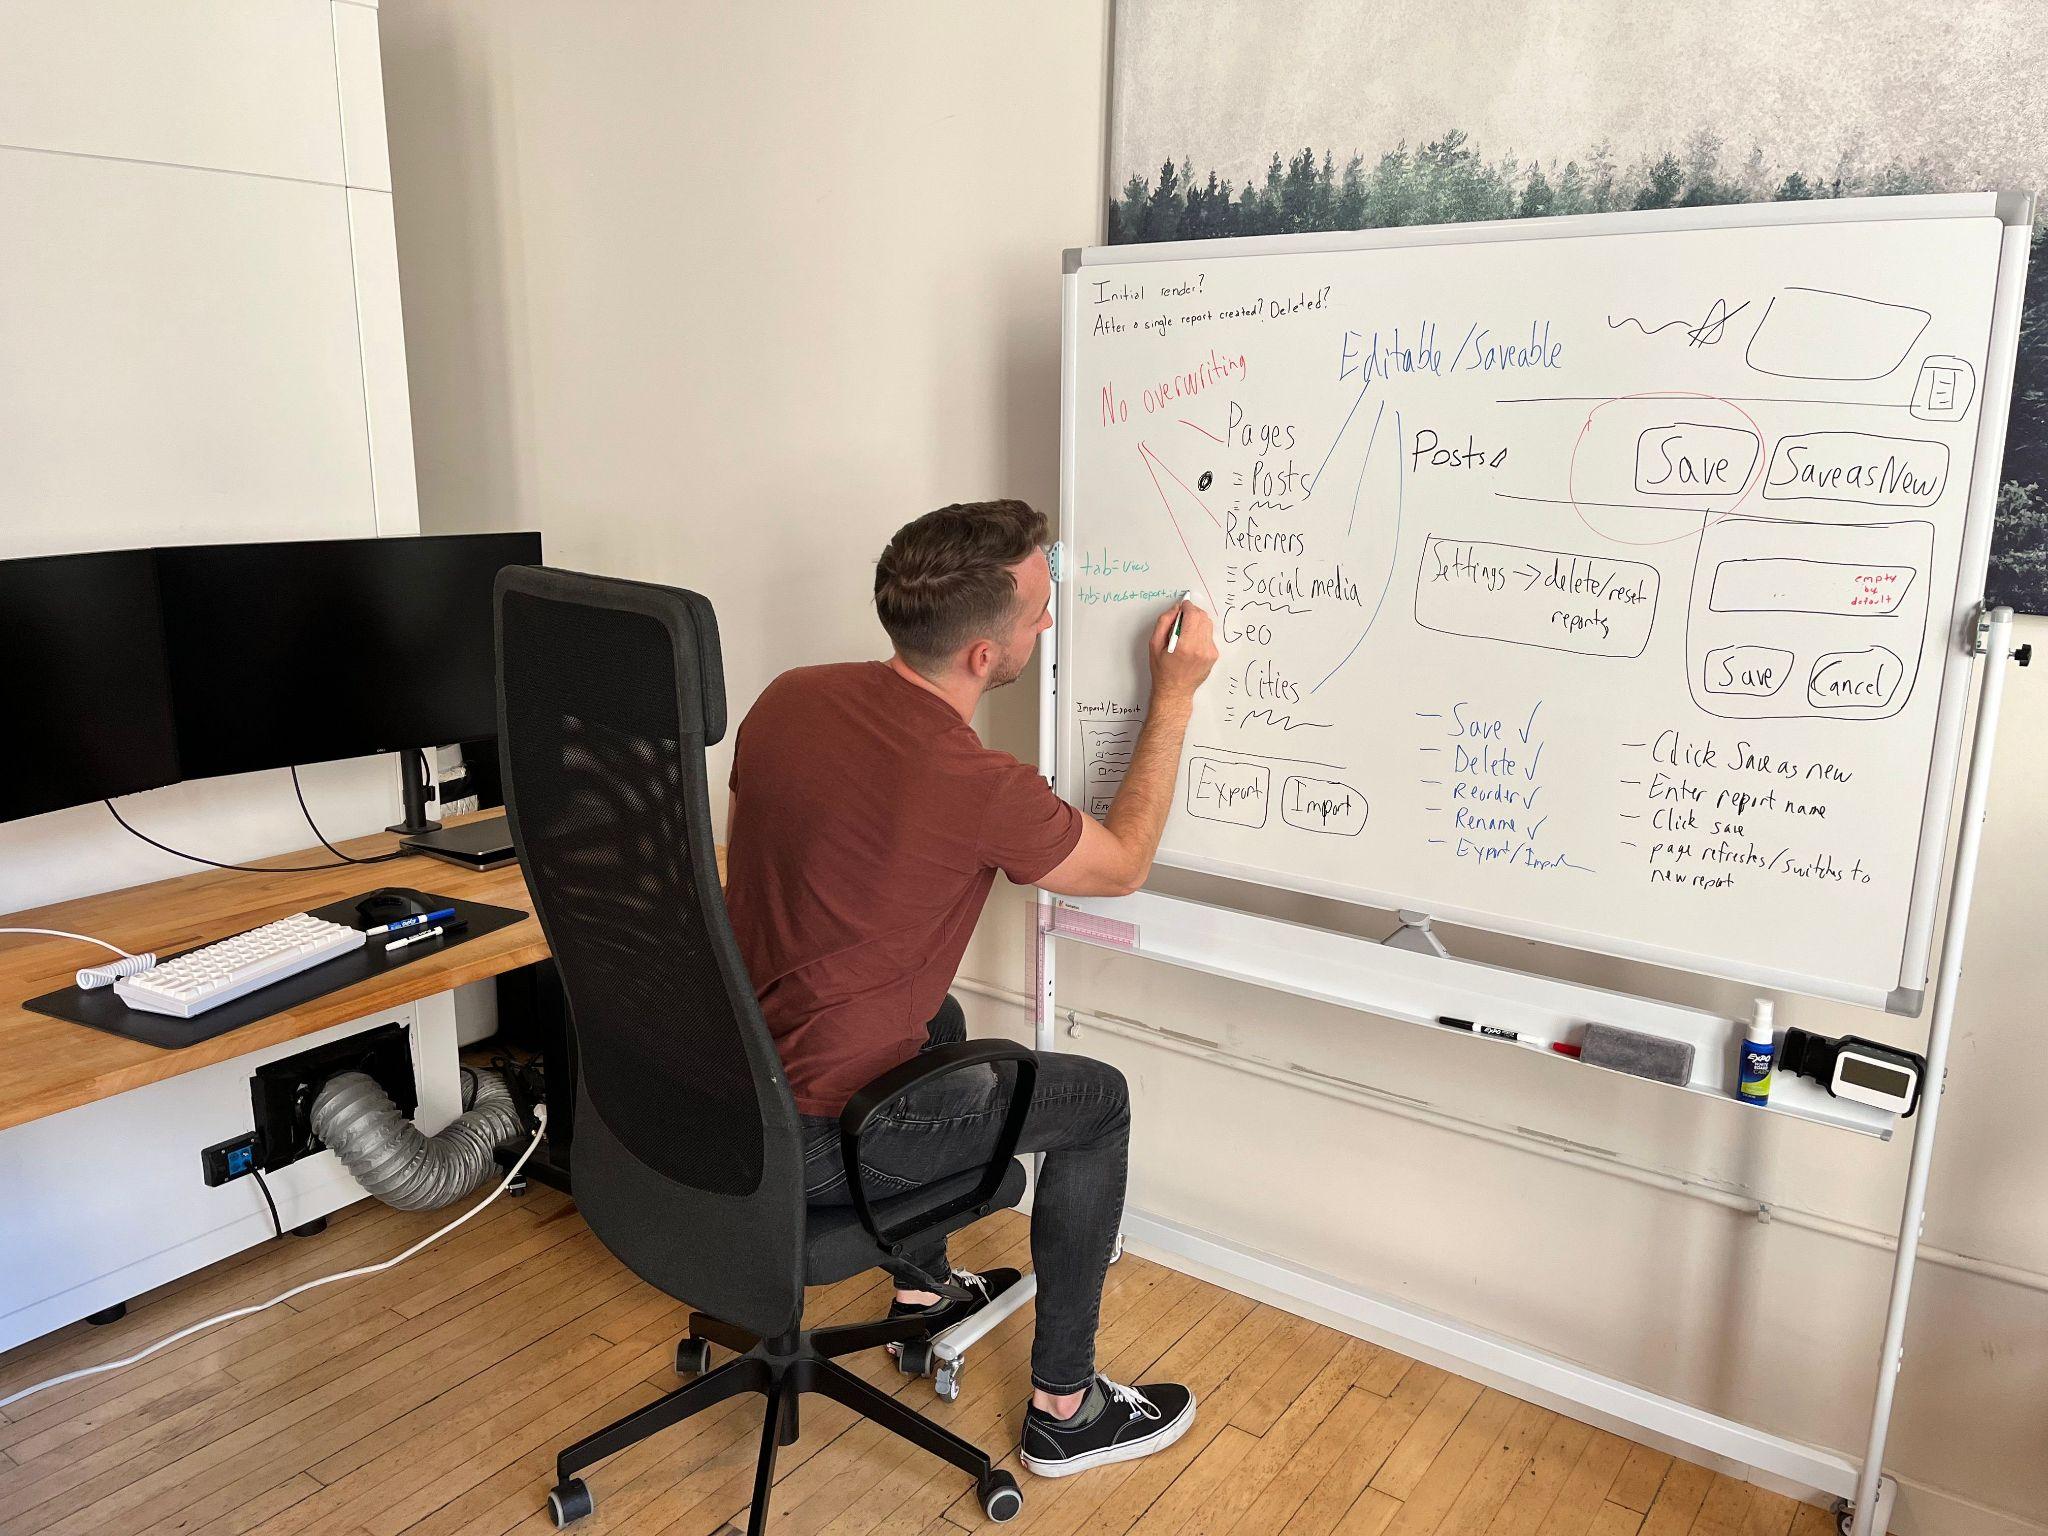 Doing planning for Independent Analytics on a whiteboard